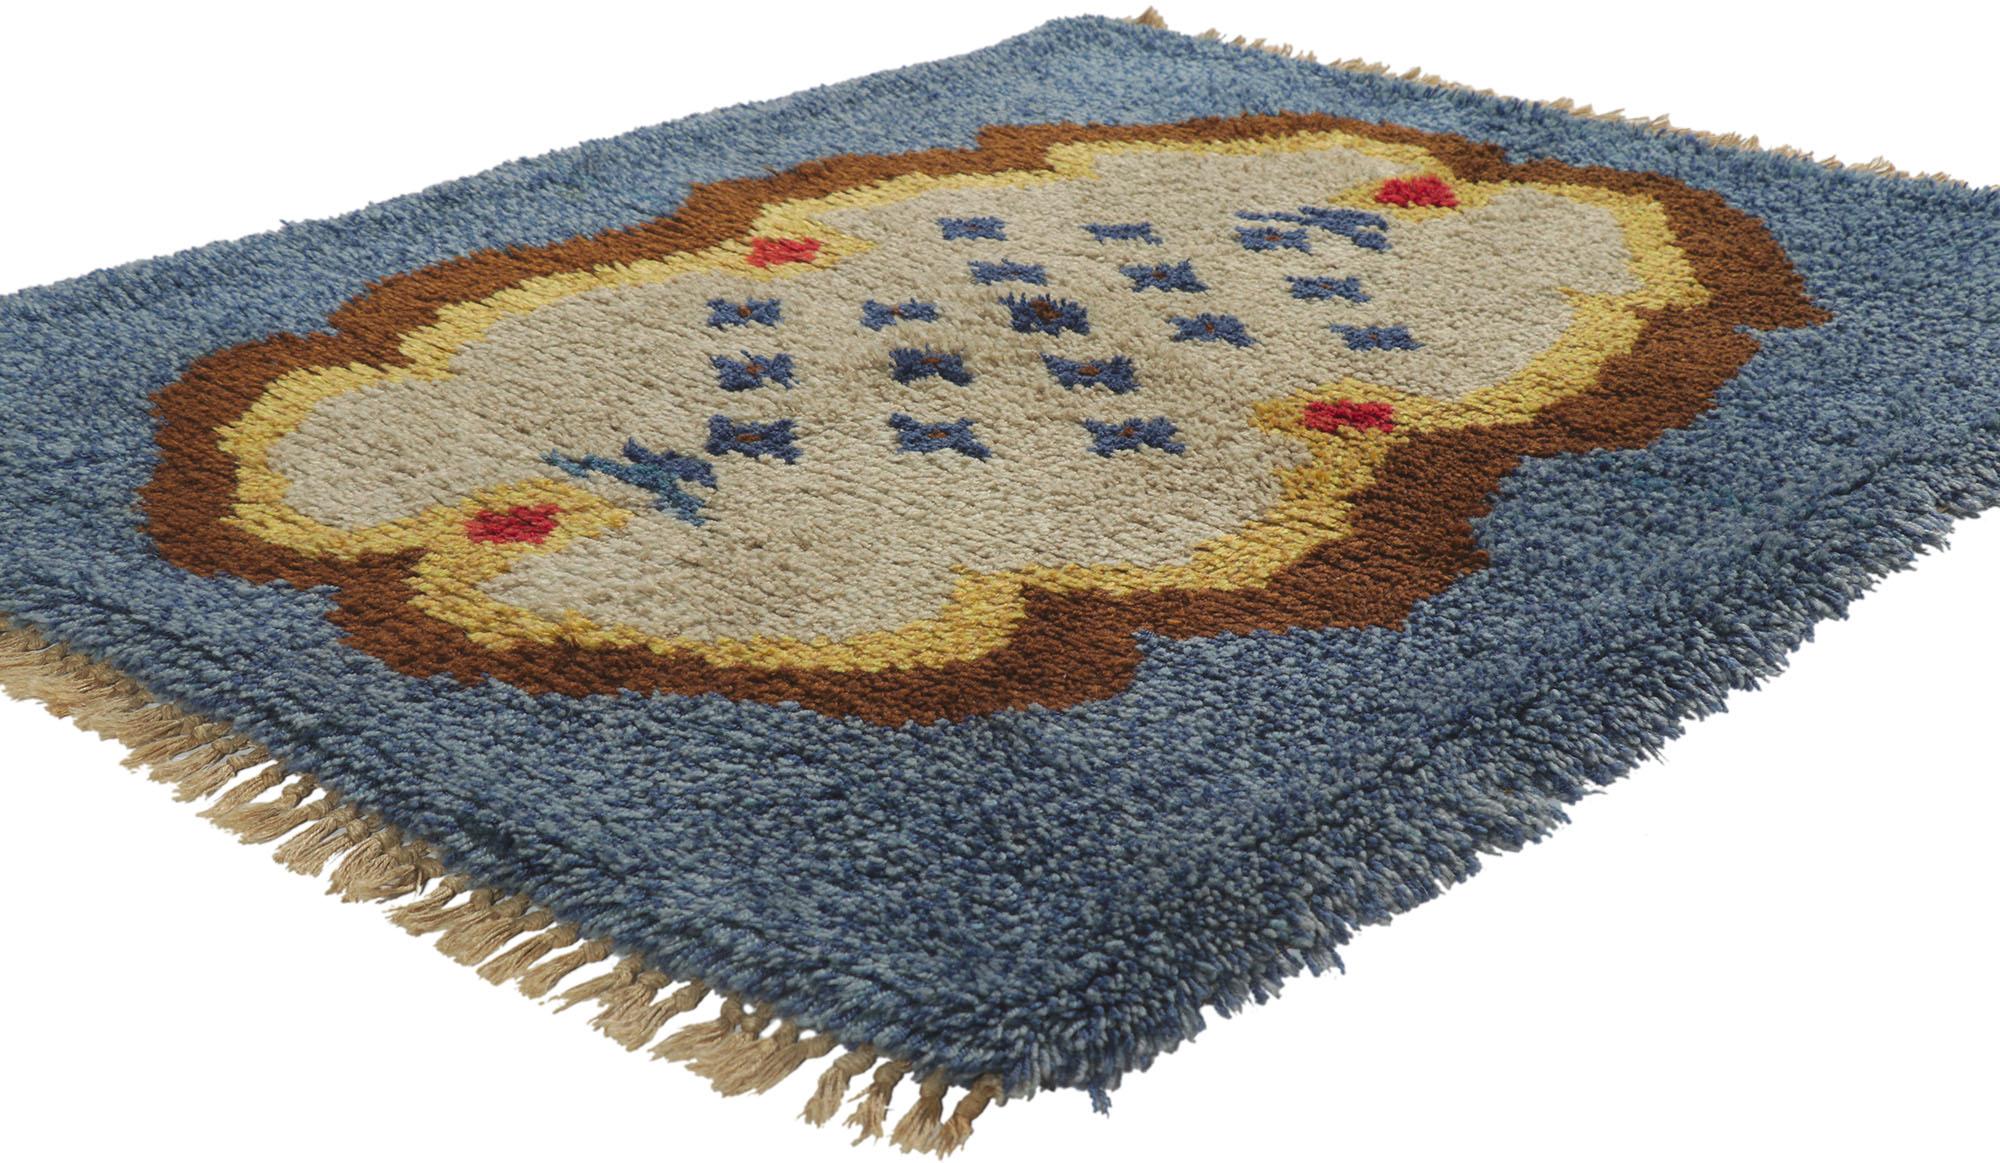 78276 Vintage Swedish Rya rug with Scandinavian Modern style 03'10 x 04'05. Full of tiny details and a bold expressive design combined with folk art tribal style, this hand-knotted wool vintage Swedish Ryijy Rya rug is a captivating vision of woven